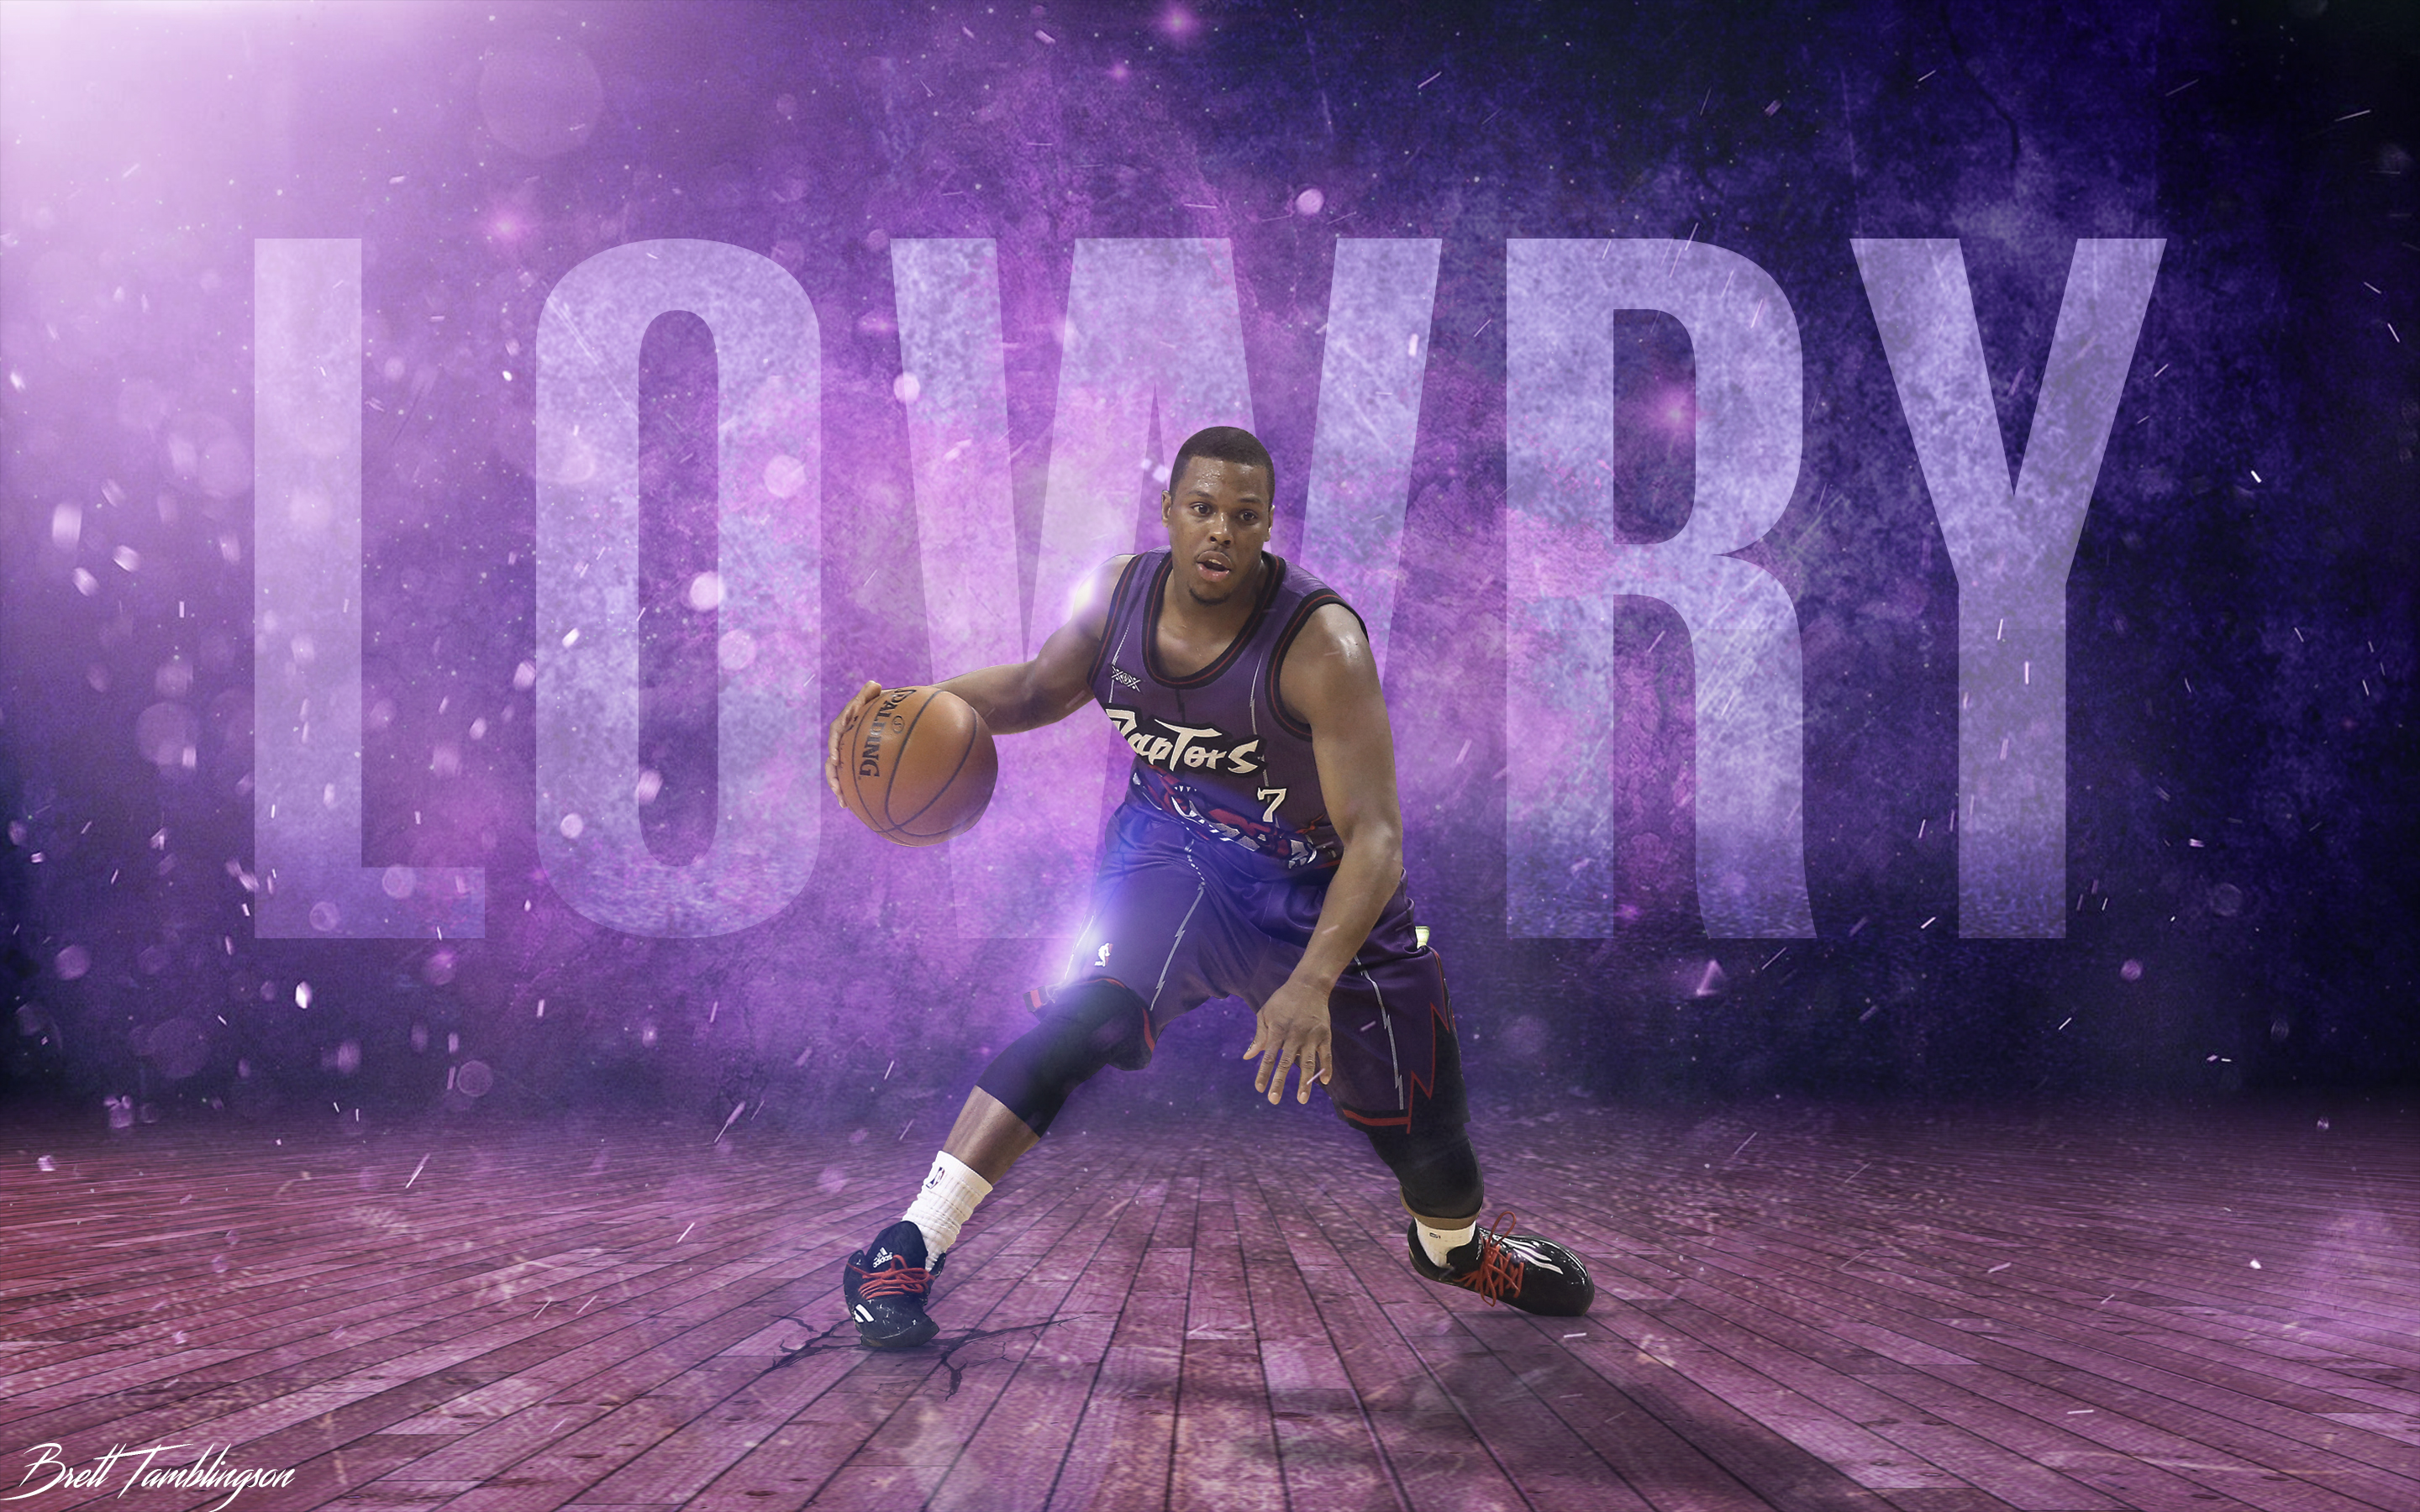 Kyle Lowry Wallpapers High Resolution and Quality Download 2880x1800